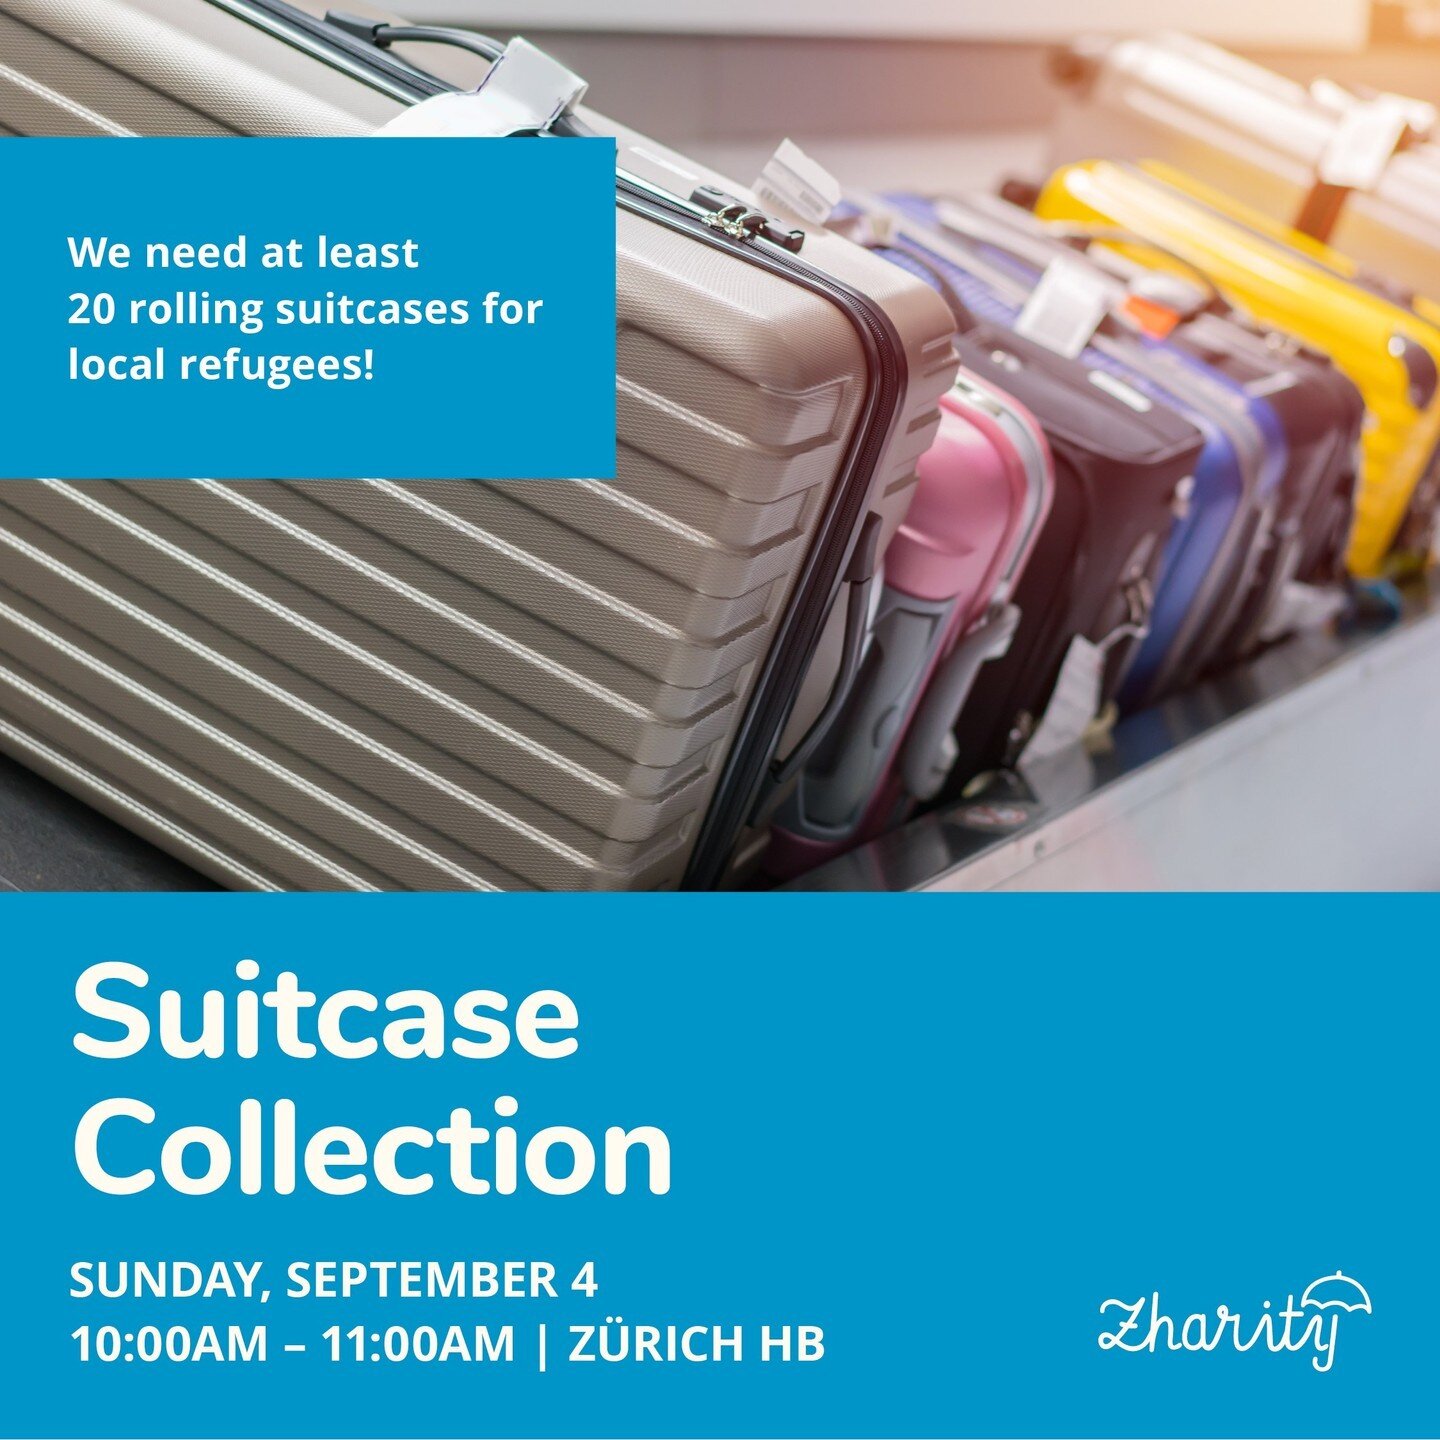 Old suitcase cluttering your basement?⁠
⁠
On Sunday, September 4 at Z&uuml;rich HB,  we will be collecting gently-loved suitcases for refugees⁠
⁠
Sign up via our link in bio